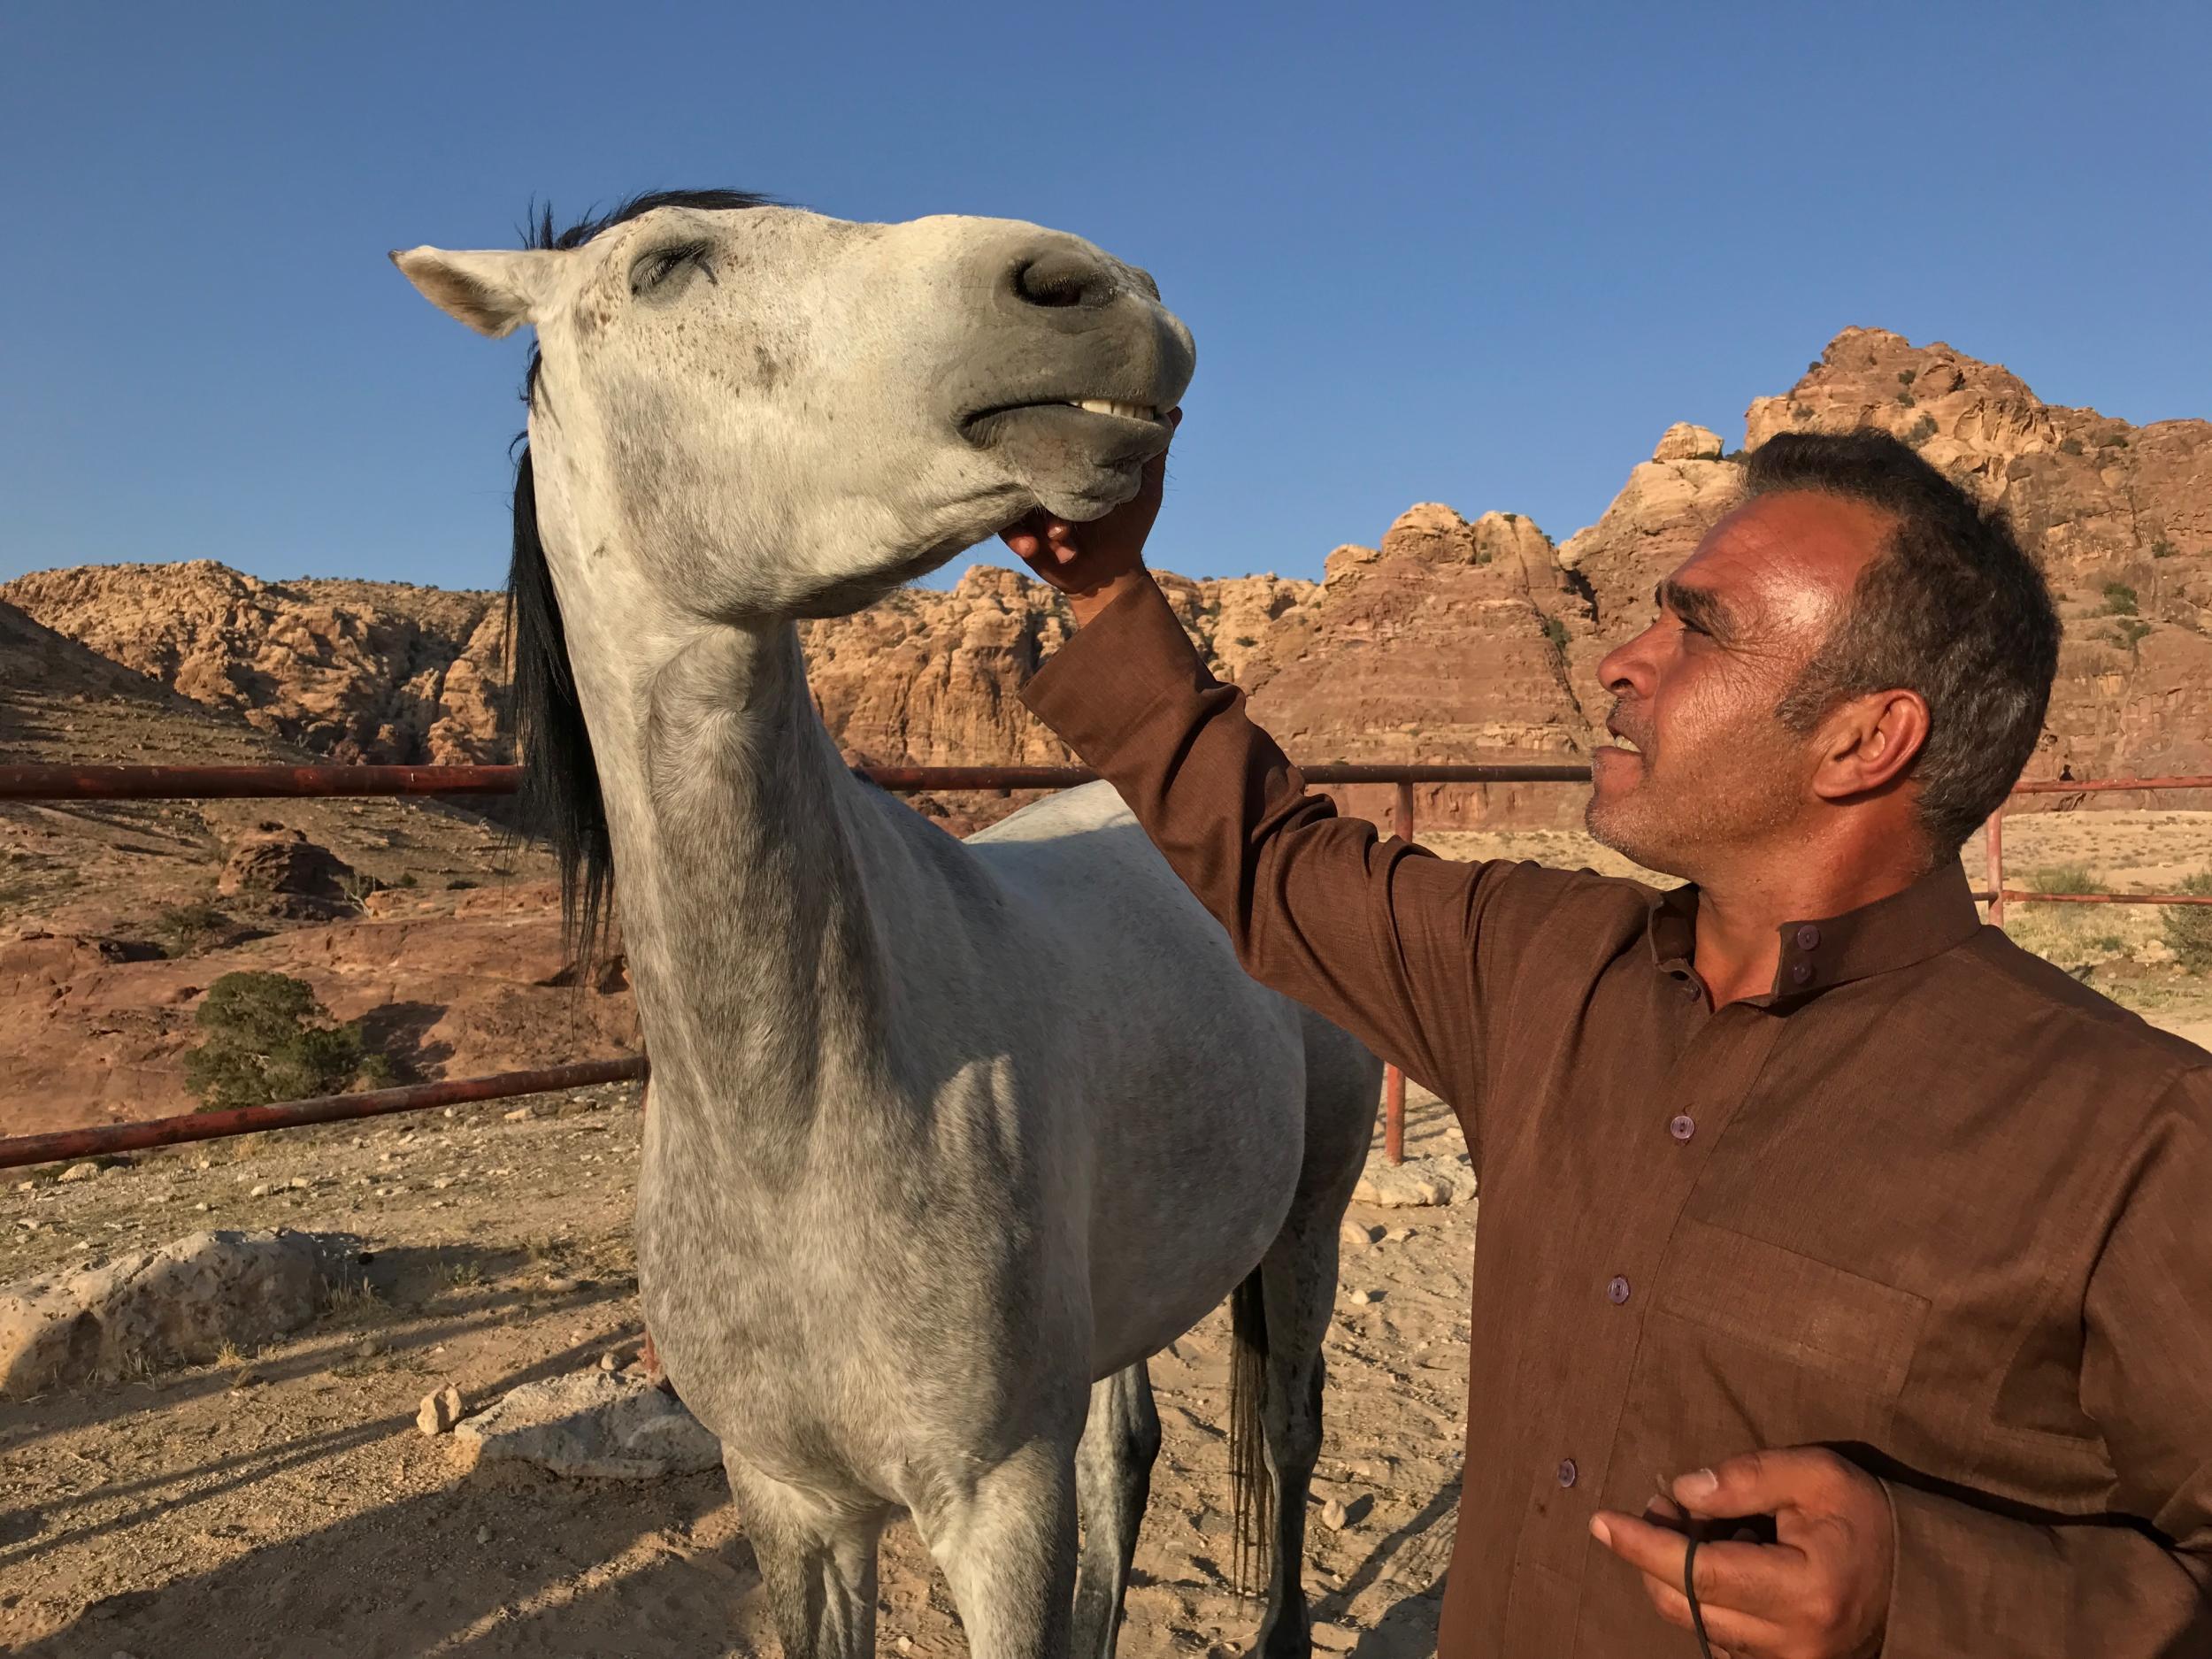 Equine therapy is the latest trend to hit Jordan